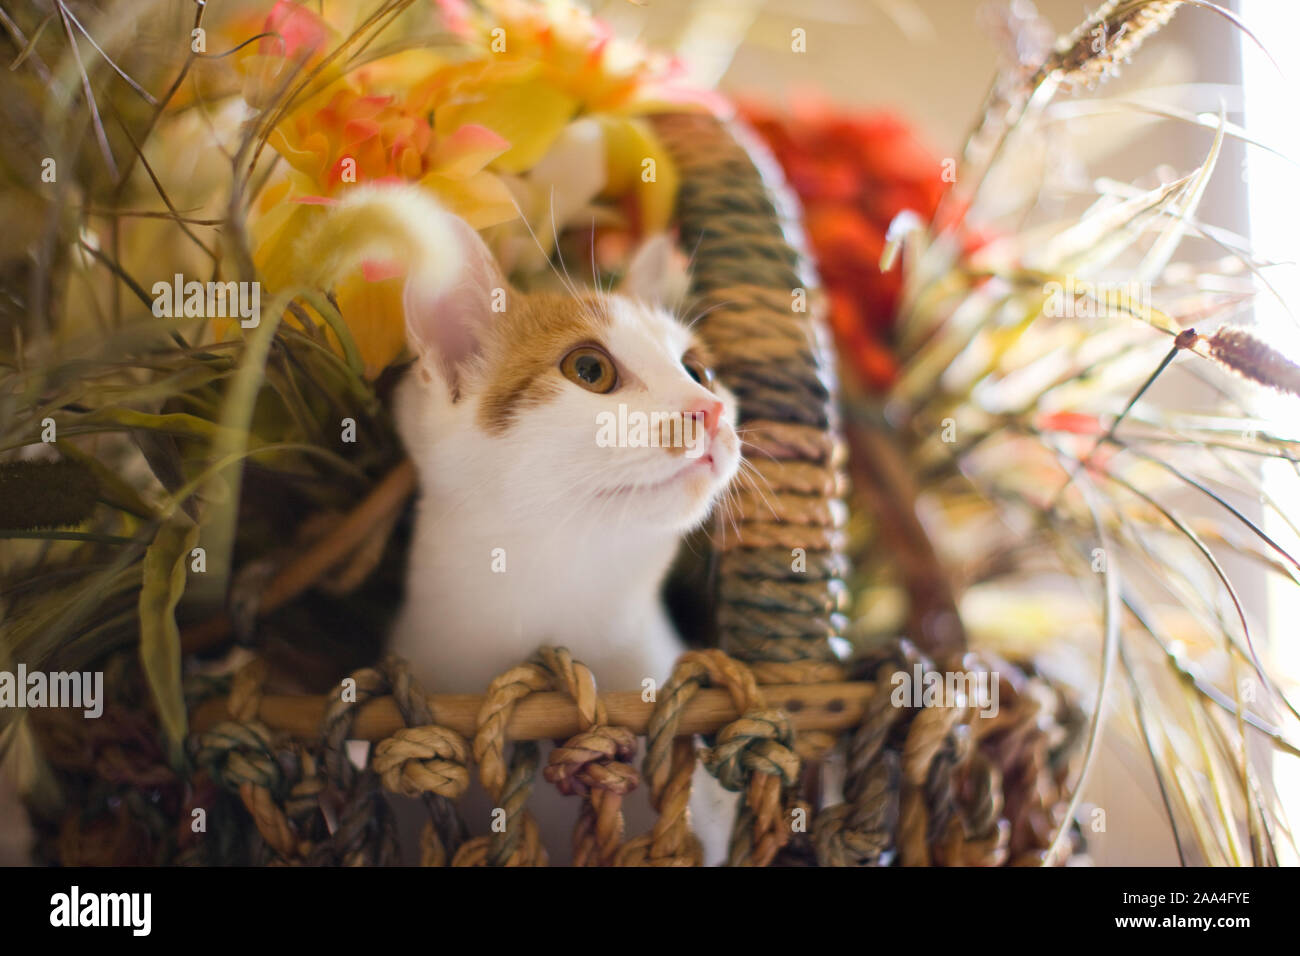 Cat in gift basket of flowers Stock Photo